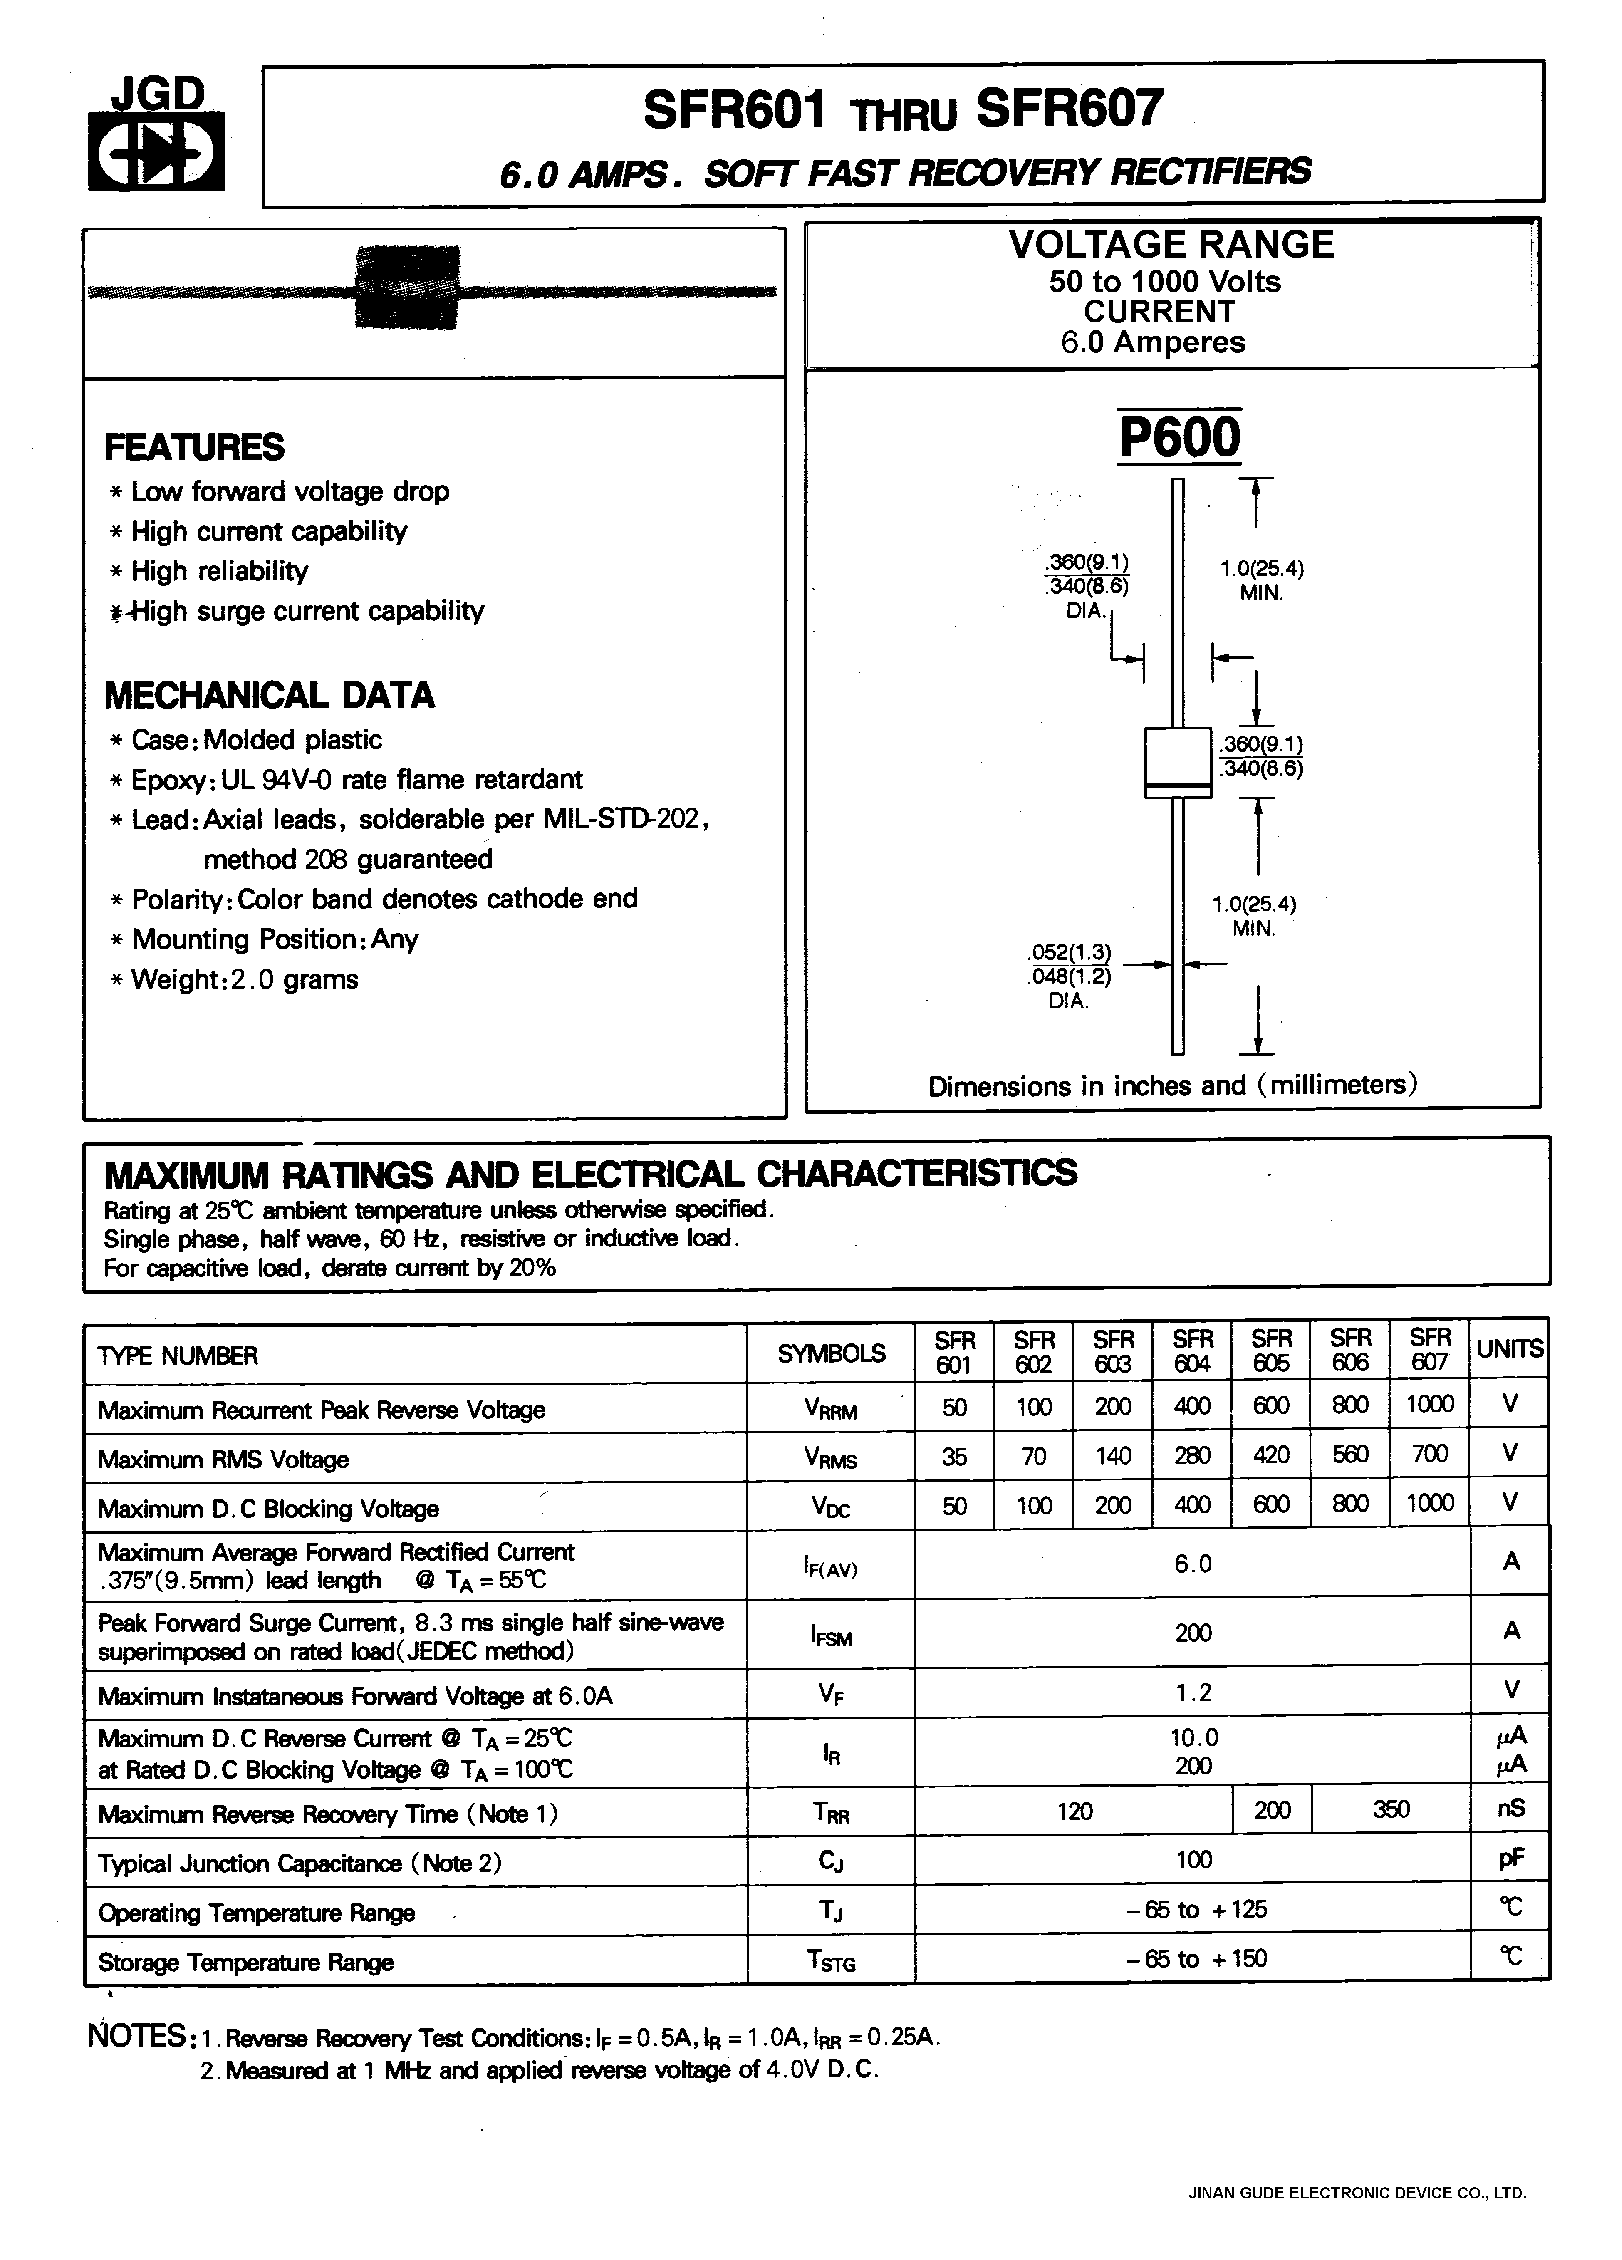 Datasheet SFR607 - 6.0 AMPS. SOFT FAST RECOVERY RECTIFIERS page 1